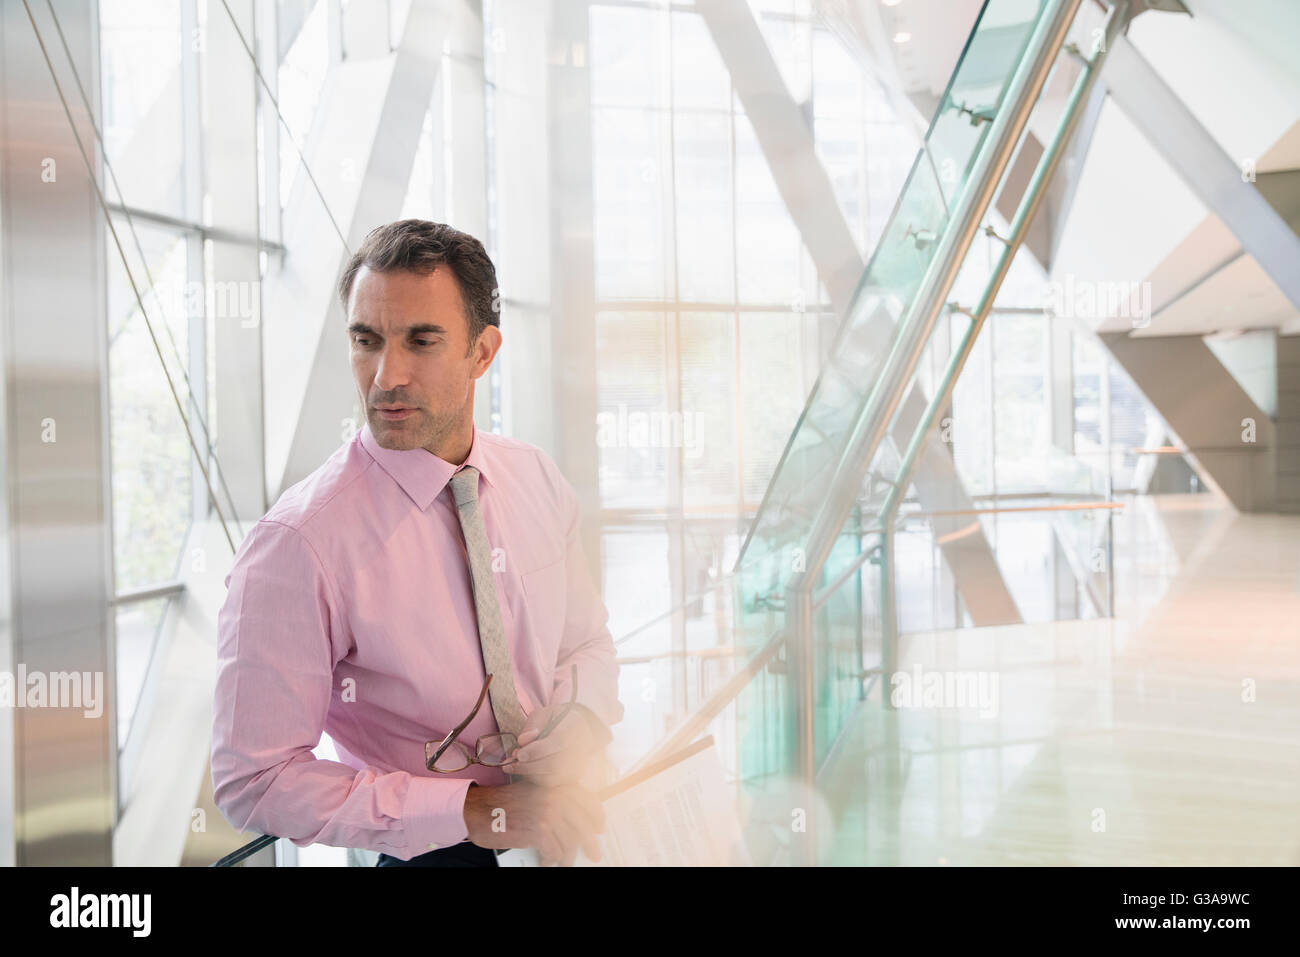 Pensive corporate businessman looking down in modern office lobby Stock Photo